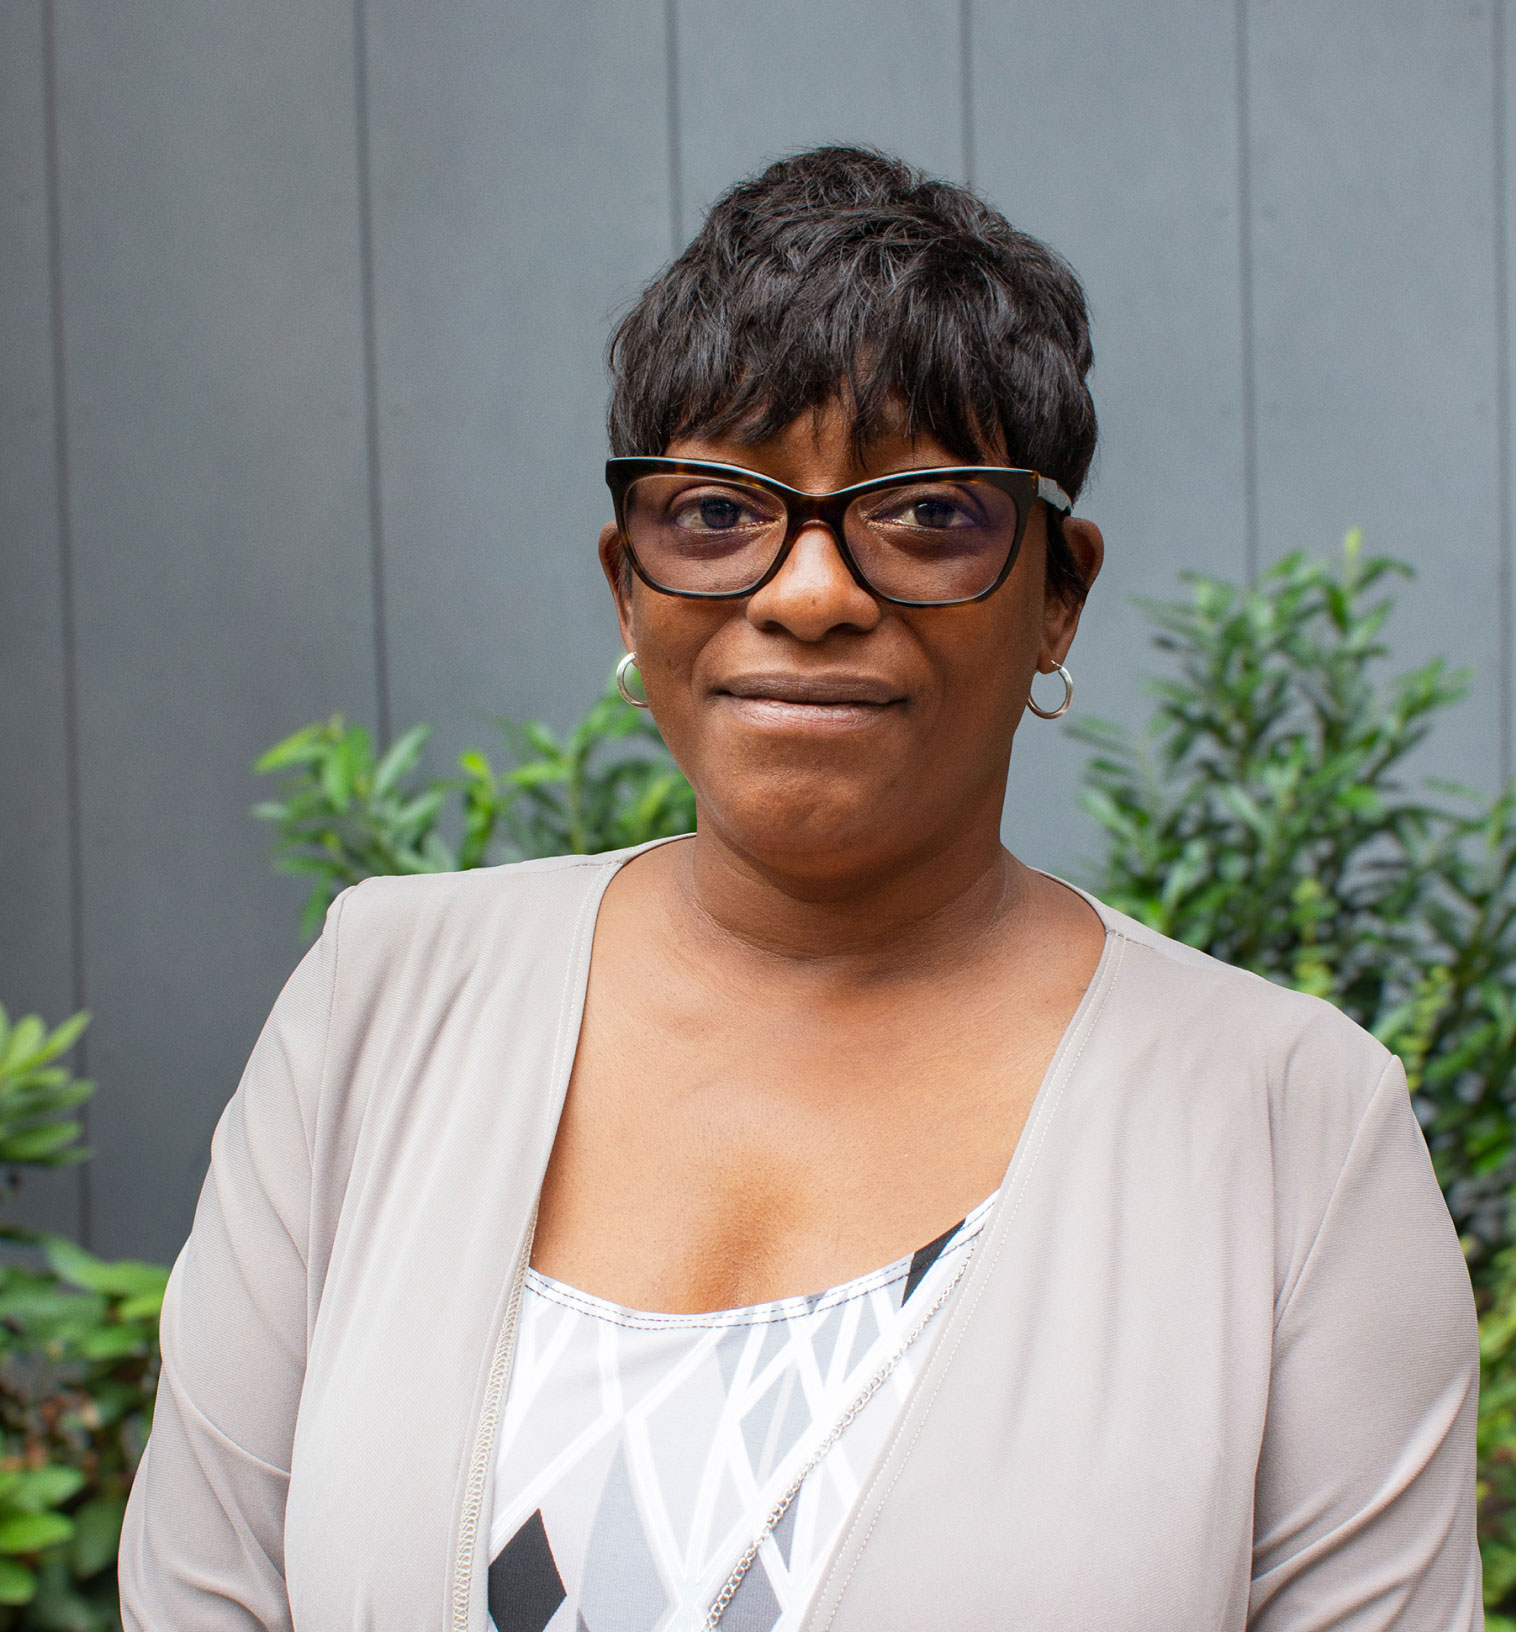 Image of an African-American woman in front of a gray wall and bushes. She is wearing a gray and white shirt with large, black glasses and has short hair.